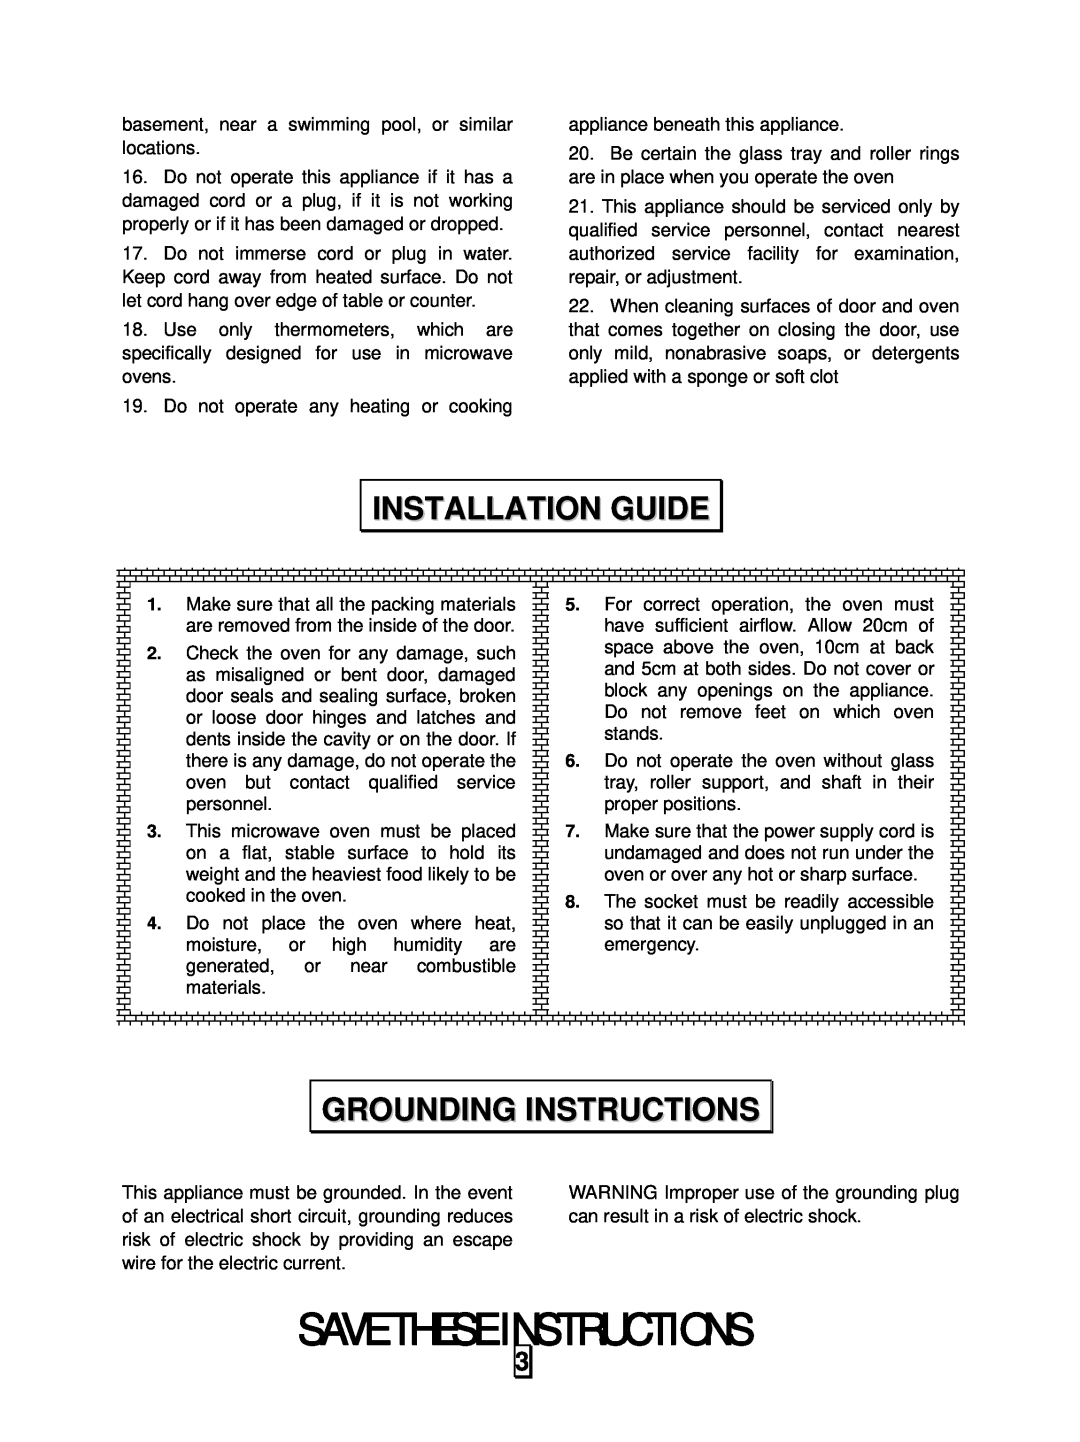 RCA RMW966 manual Installation Guide, Grounding Instructions, Save These Instructions 